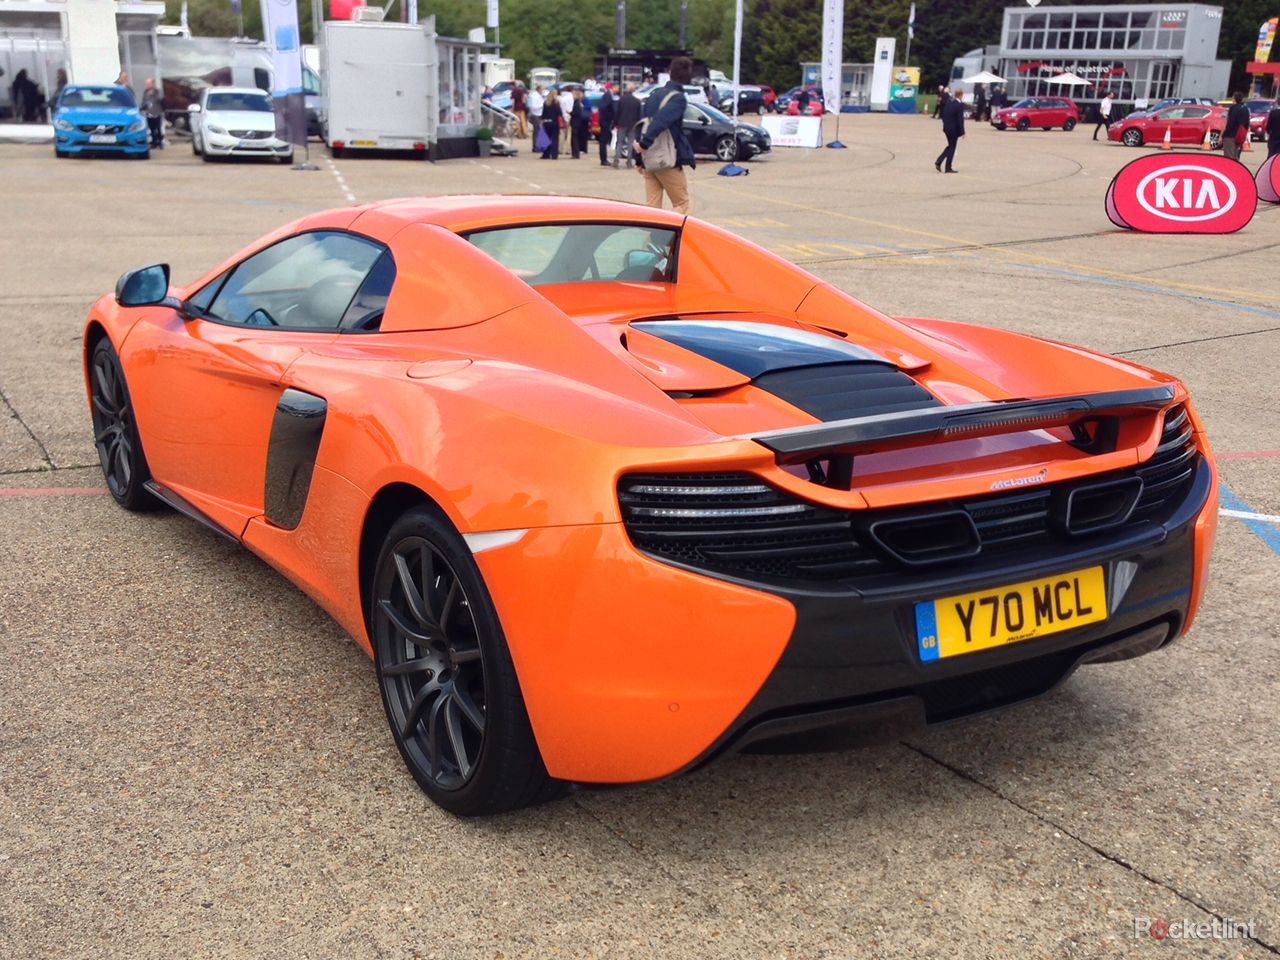 mclaren 650s first drive brit supercar contrasts comfort with savage performance image 12